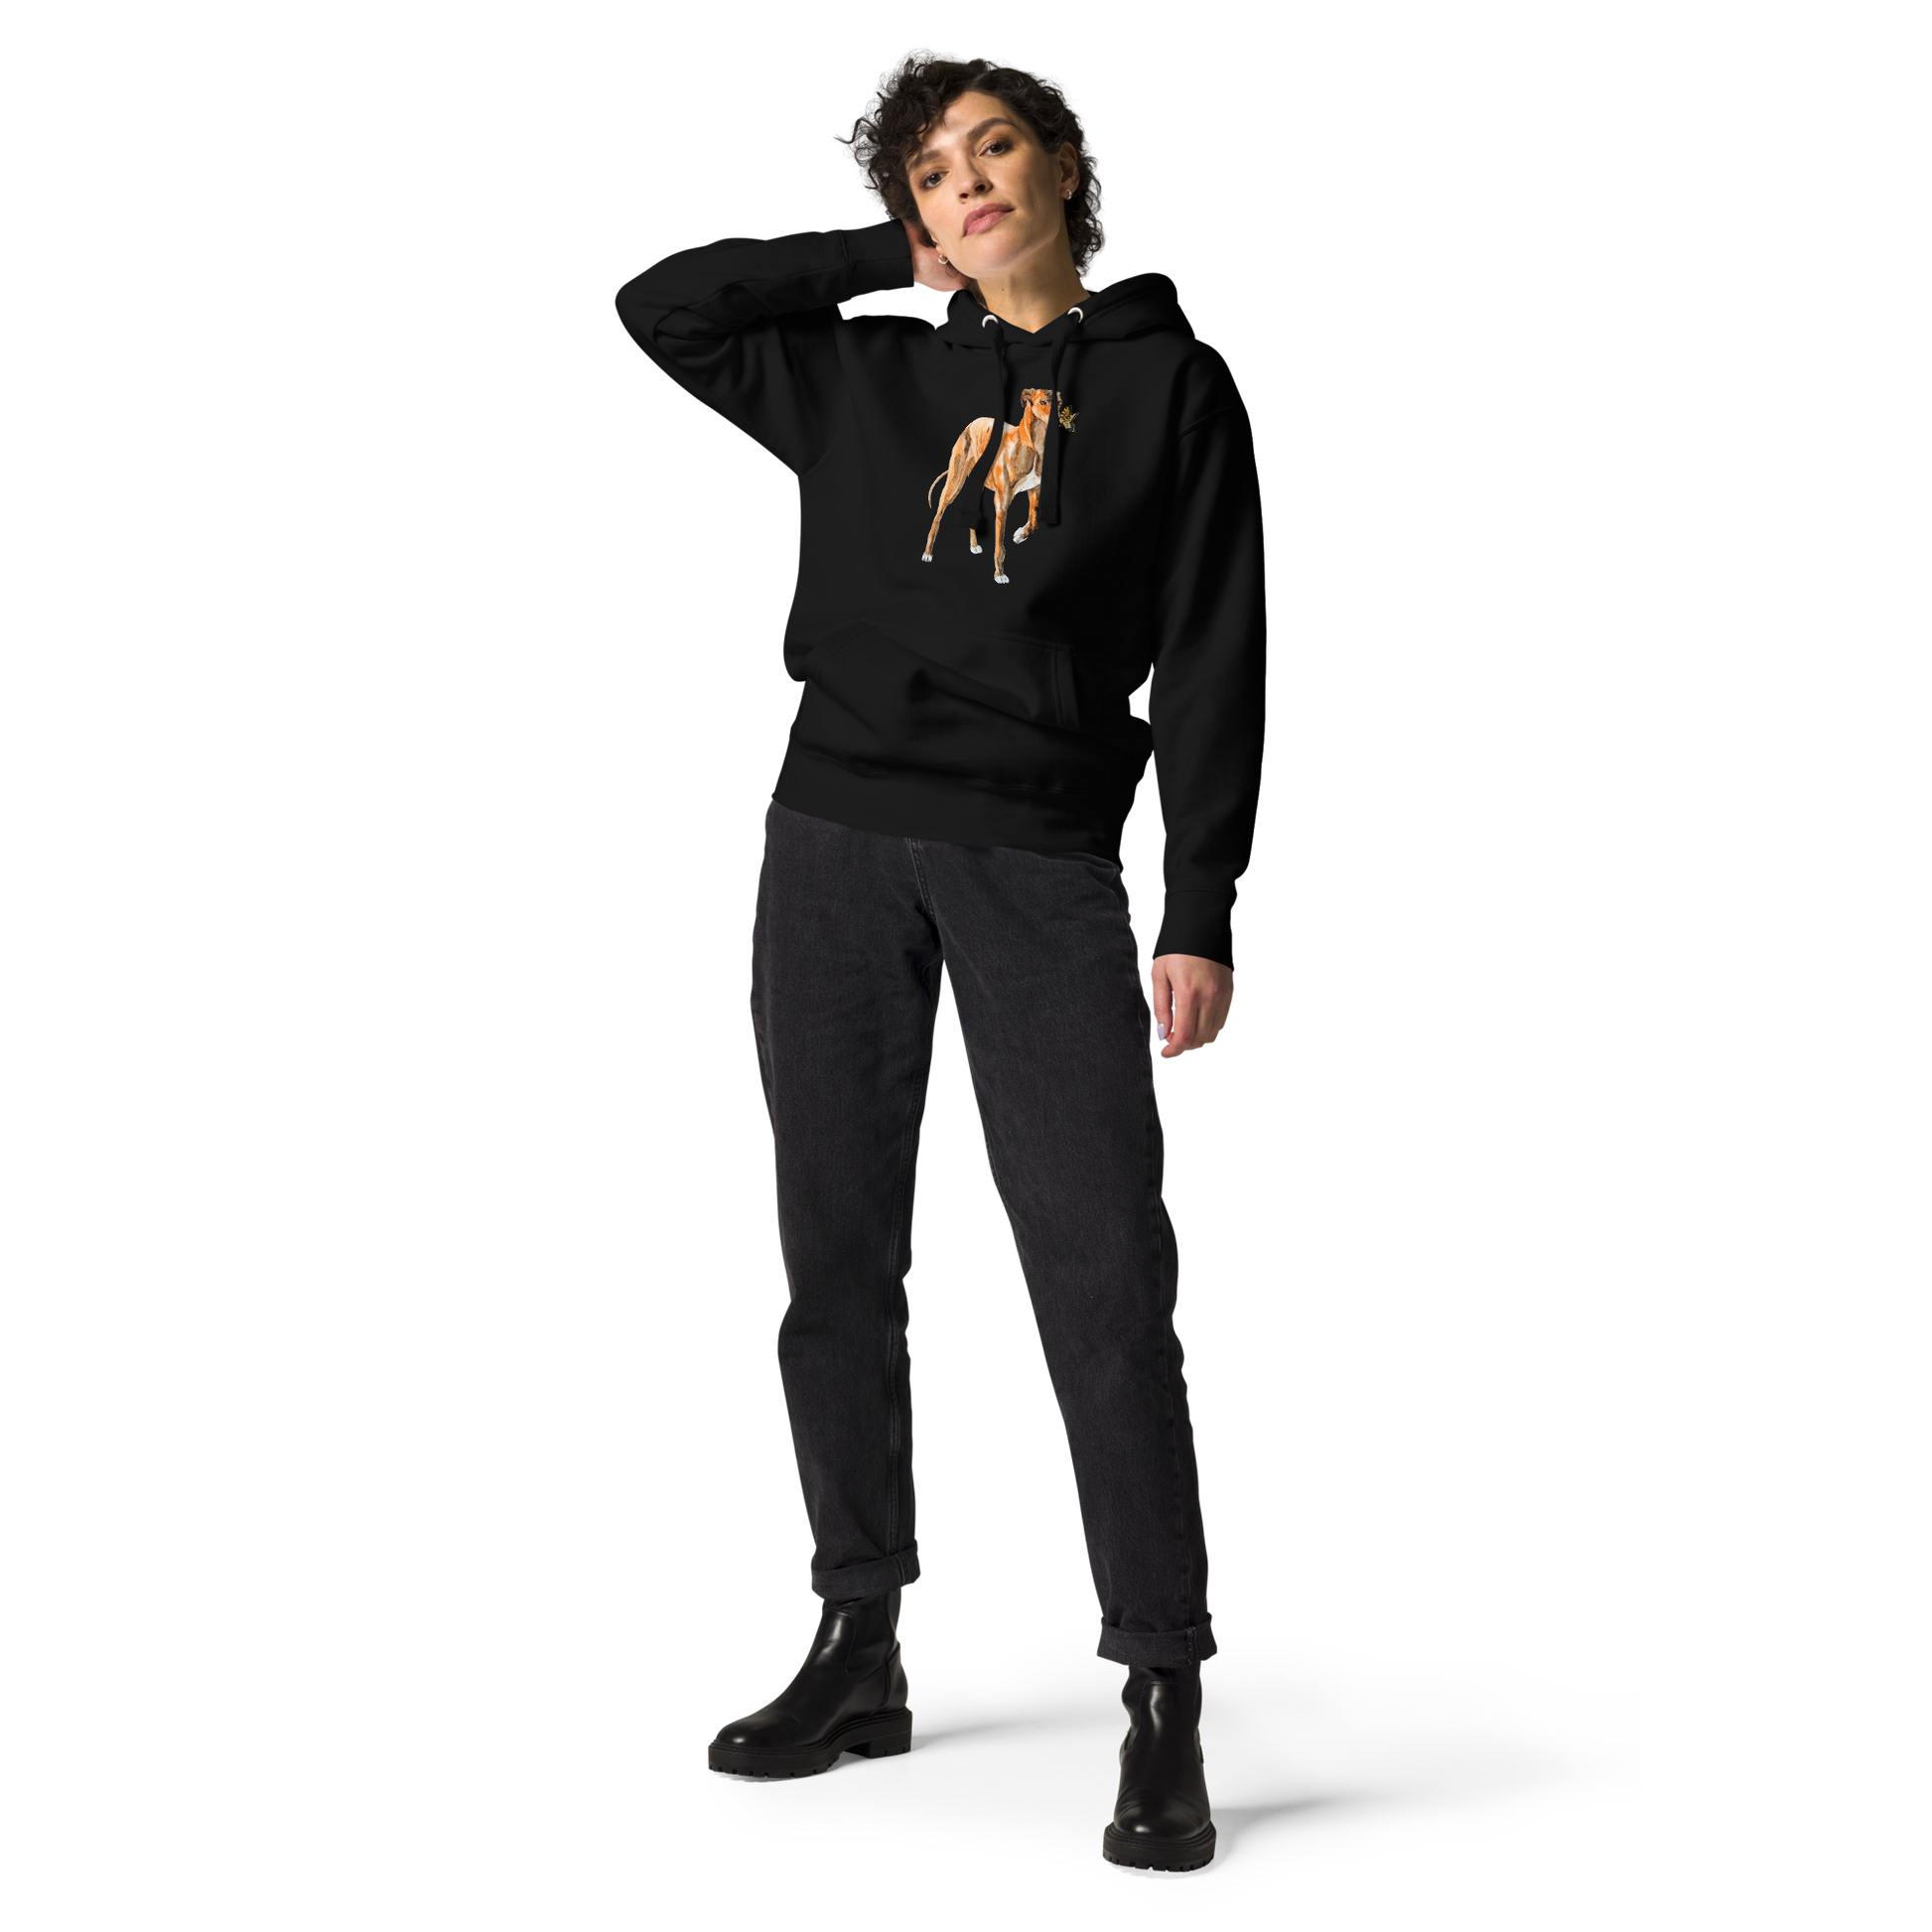 Woman wearing a Black Premium Greyhound Hoodie featuring an adorable Greyhound And Butterfly graphic on the chest - Cute Graphic Greyhound Hoodies - Boozy Fox